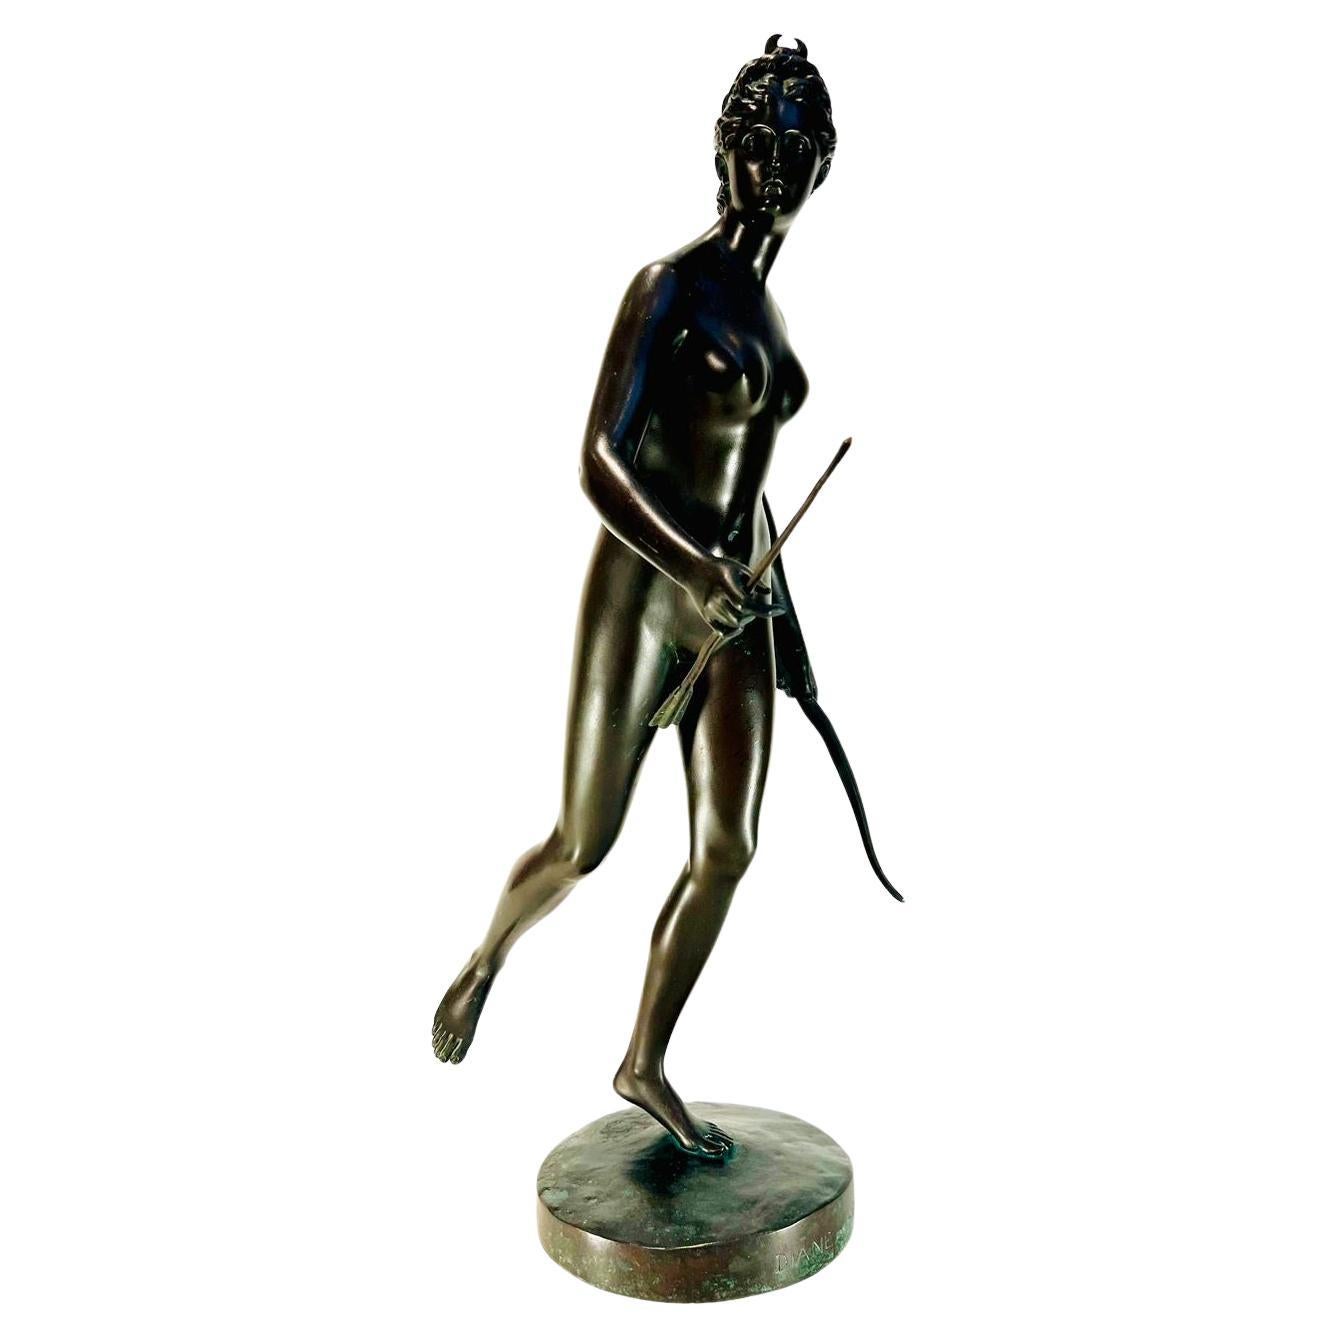 J A Houdon france bronze 1790 "Diane" by Barbedienne founder.